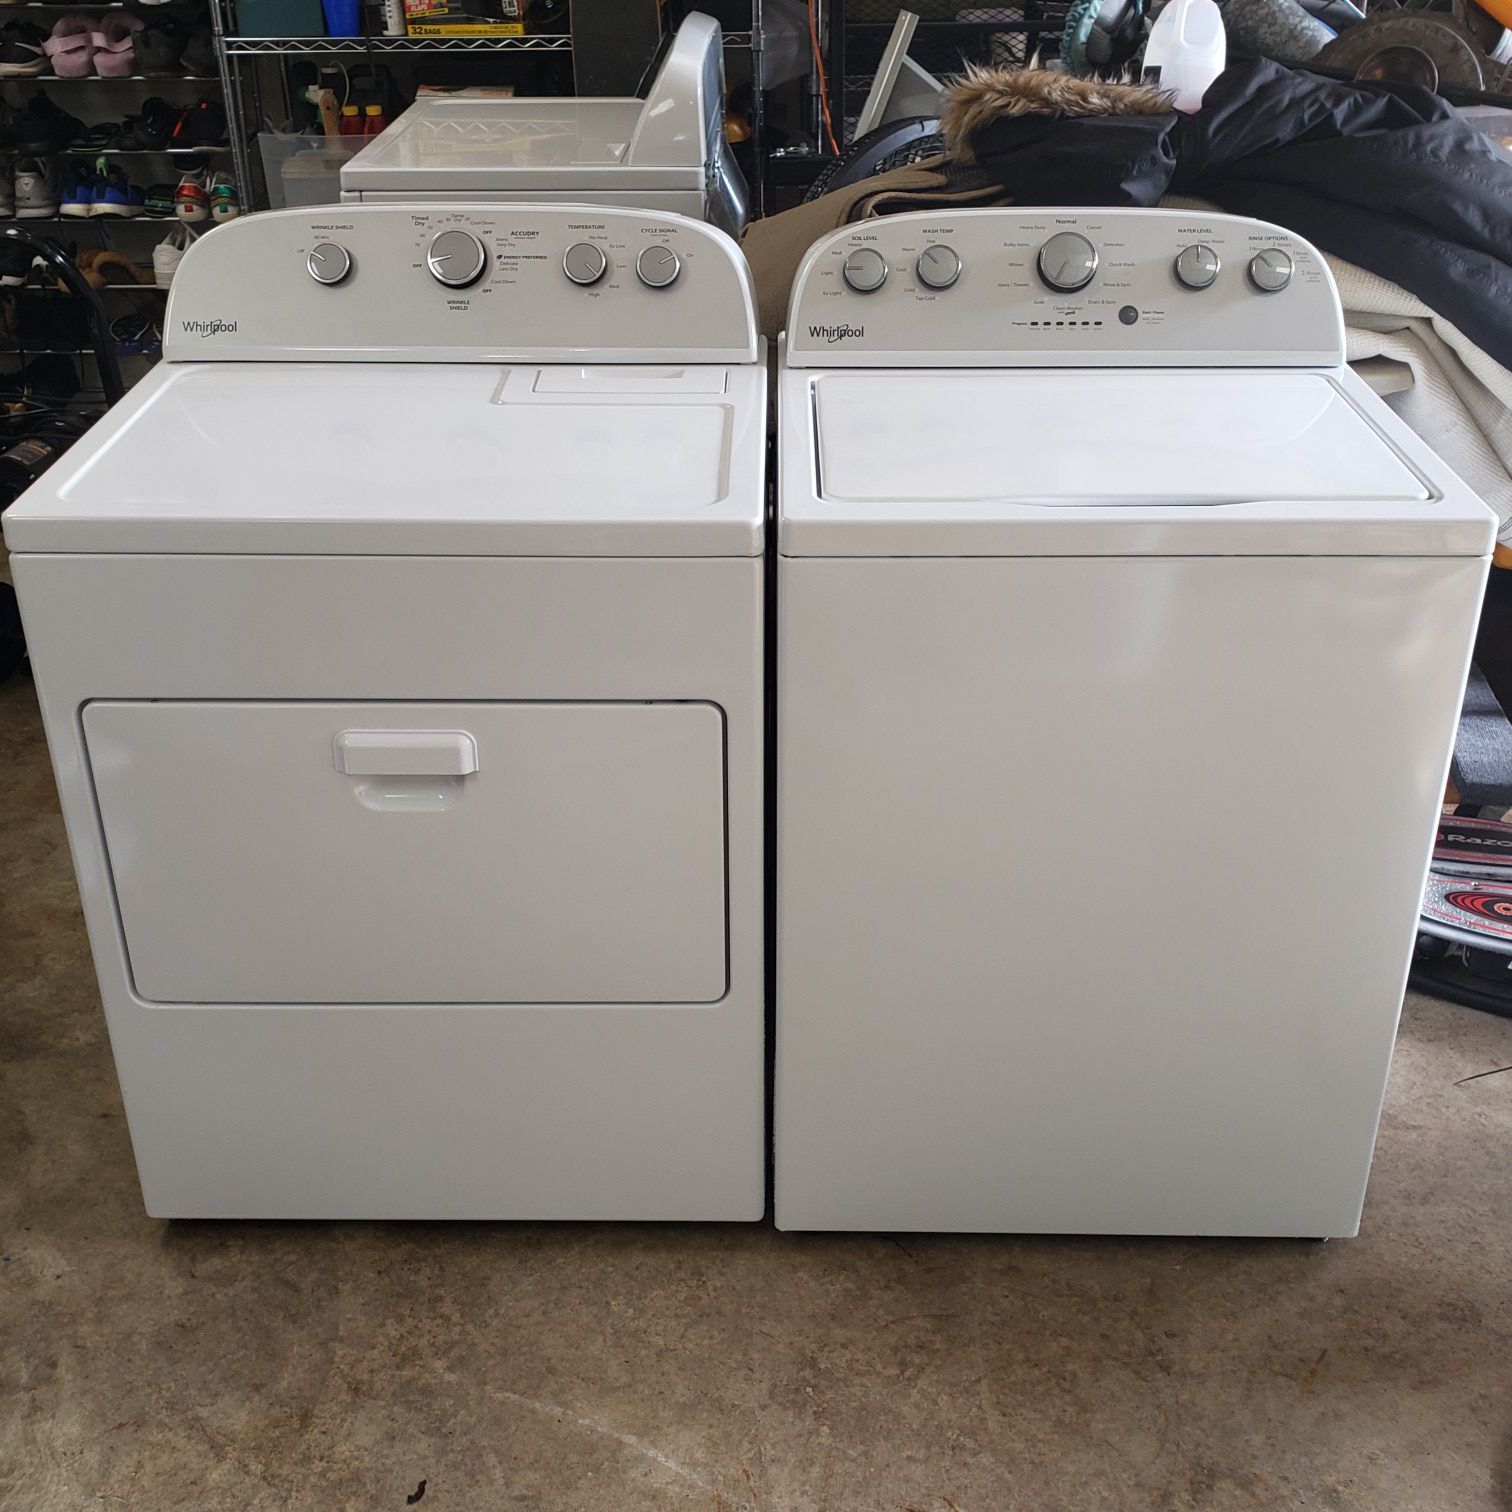 Whirlpool Waher and Dryer Set Brand New.